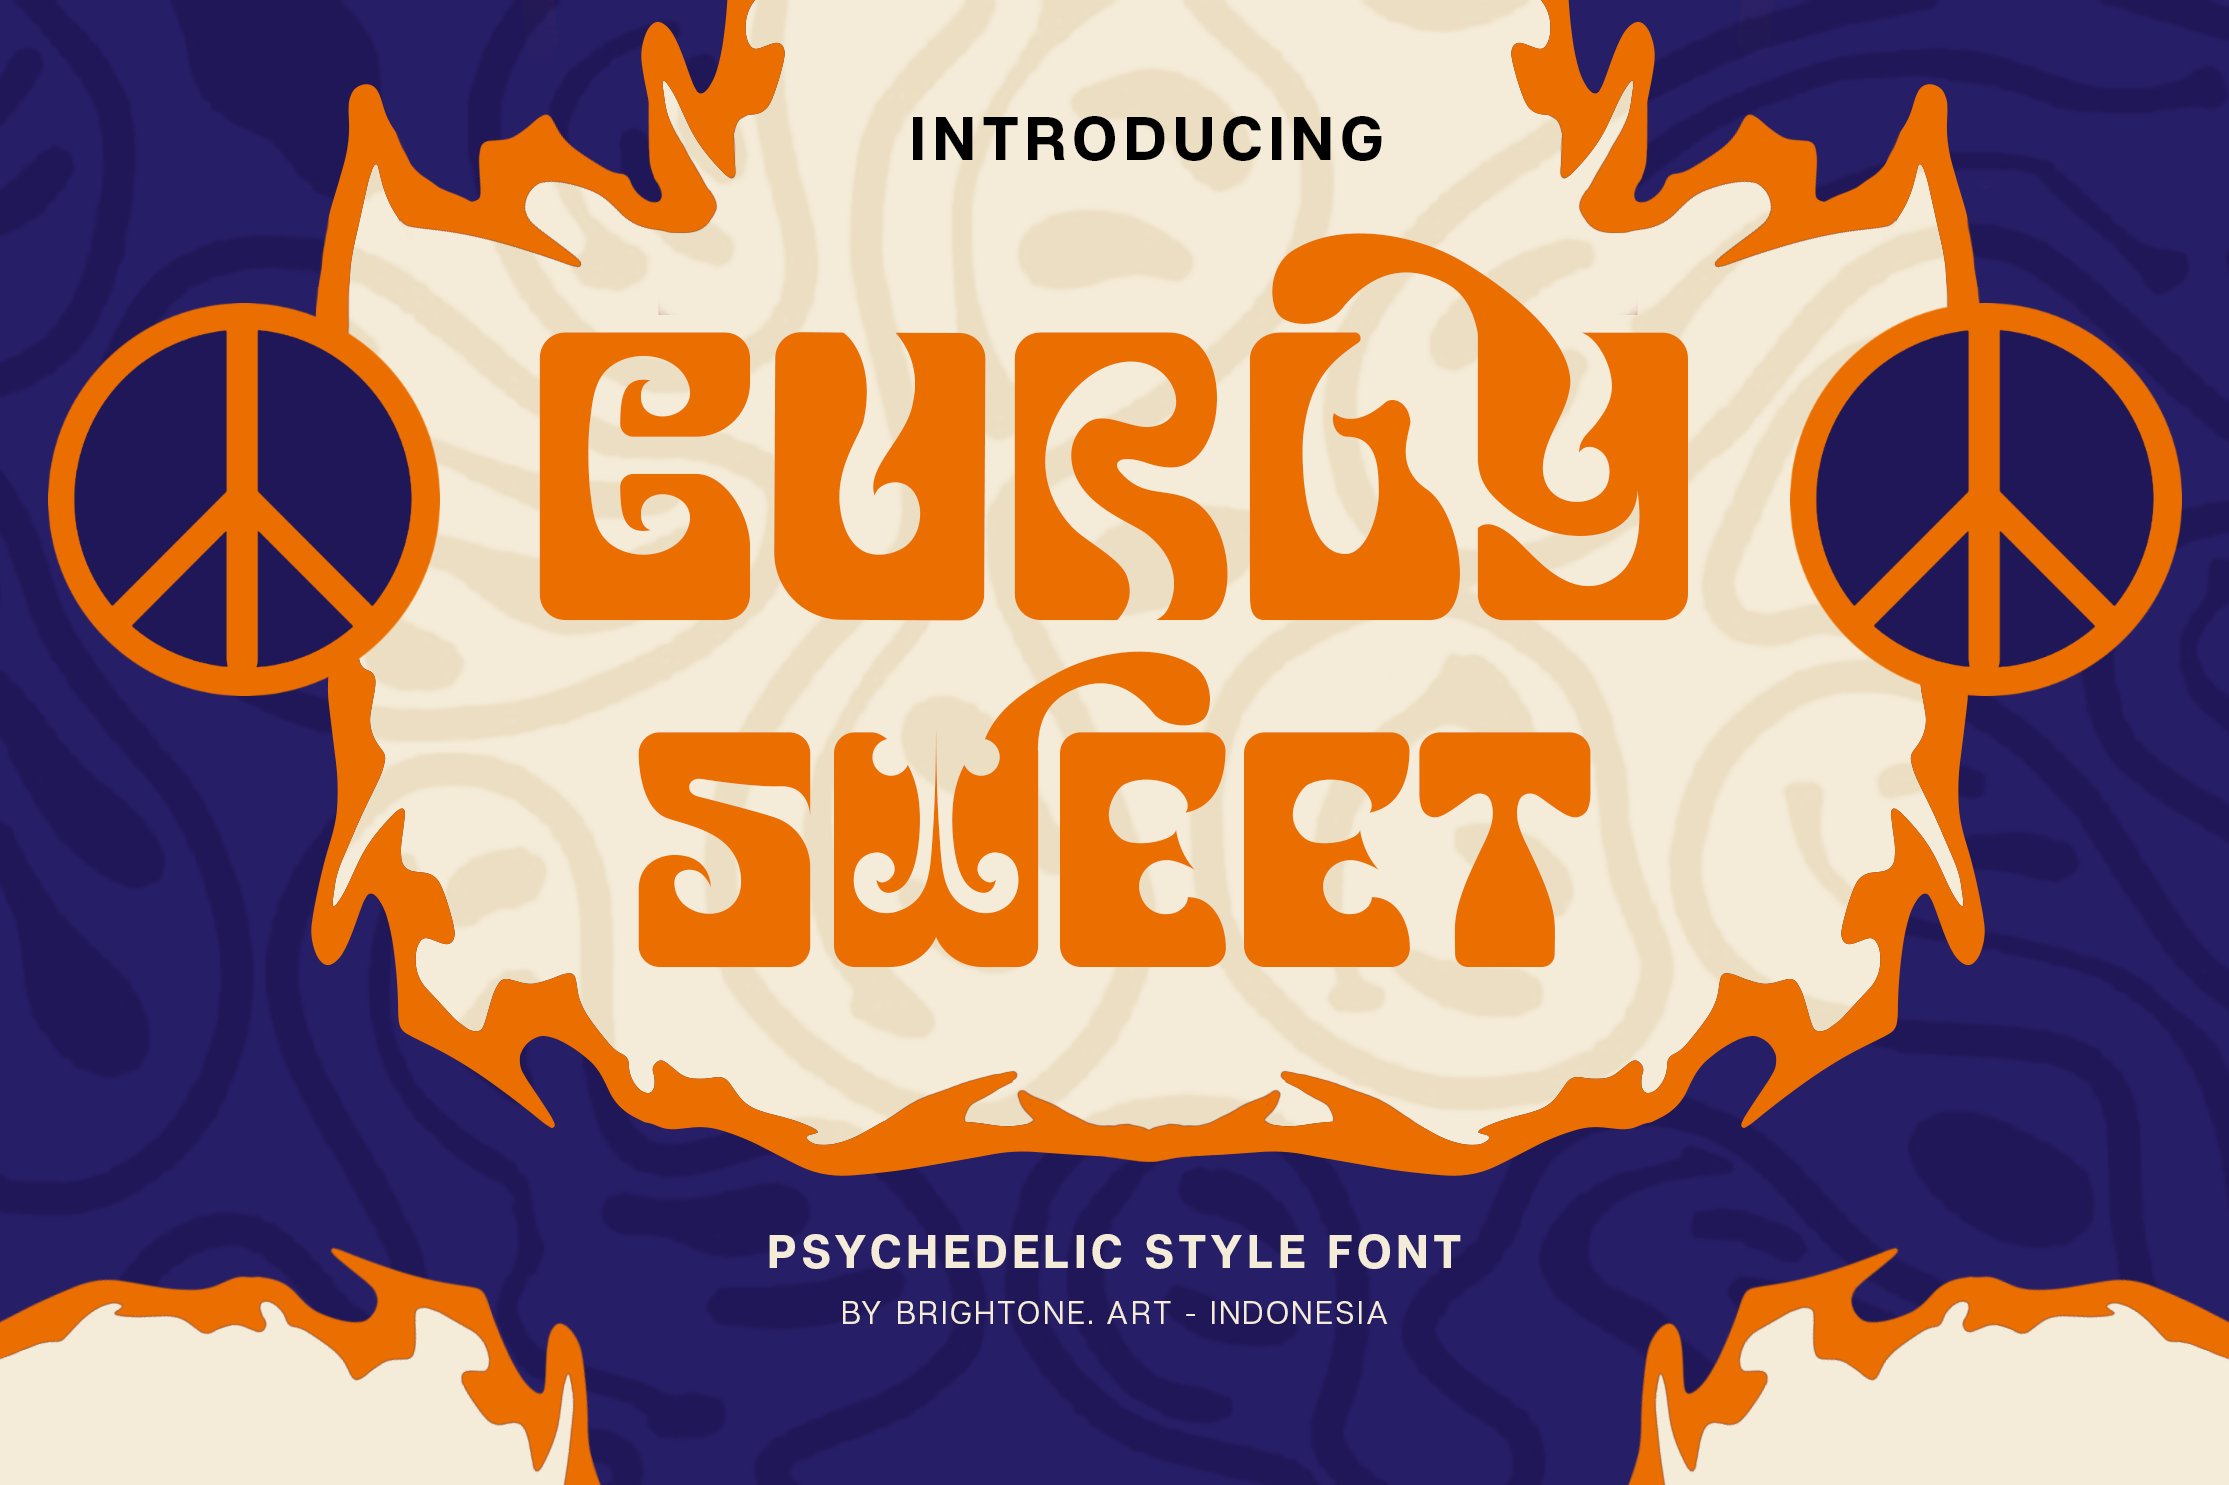 Curly Sweet - Psychedelic Style cover image.